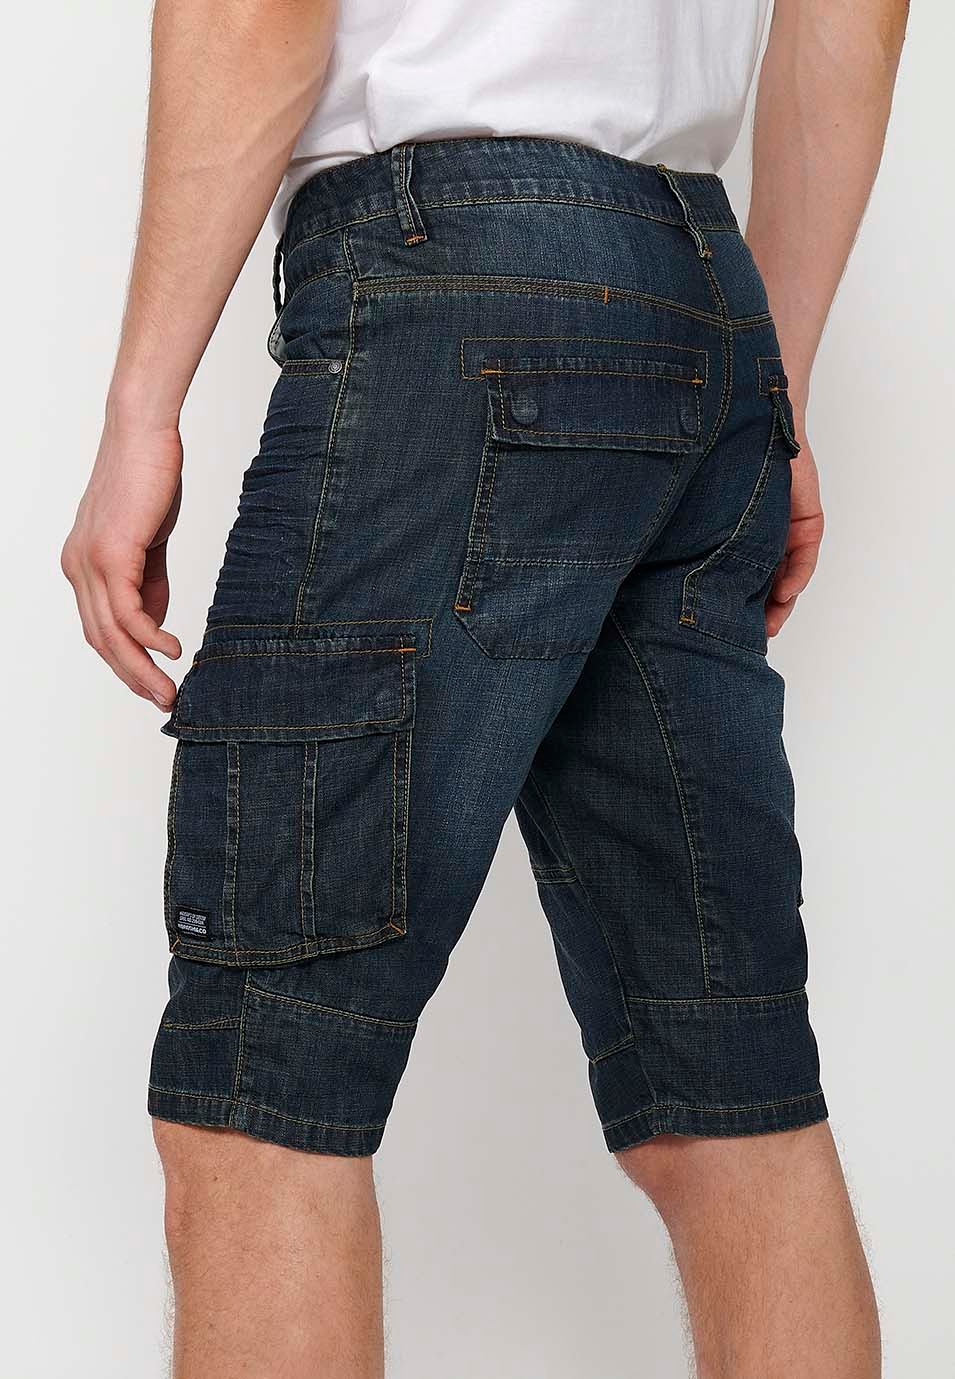 Cotton Pirate Denim Bermuda Shorts with Side Pockets and Front Closure with Zipper and Button in Blue for Men 6